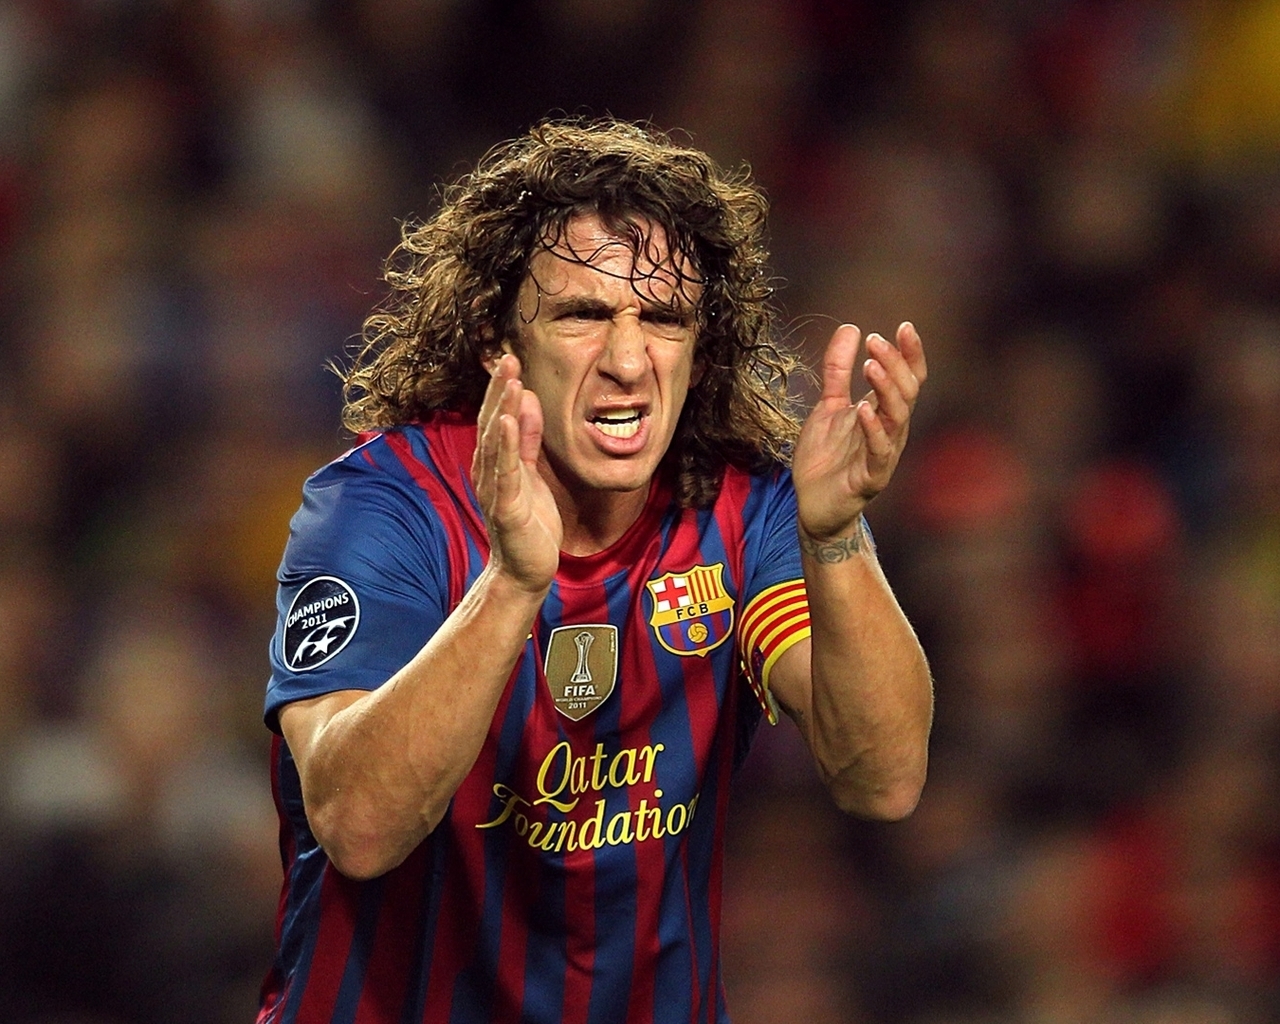 Carles Puyol Urging for 1280 x 1024 resolution